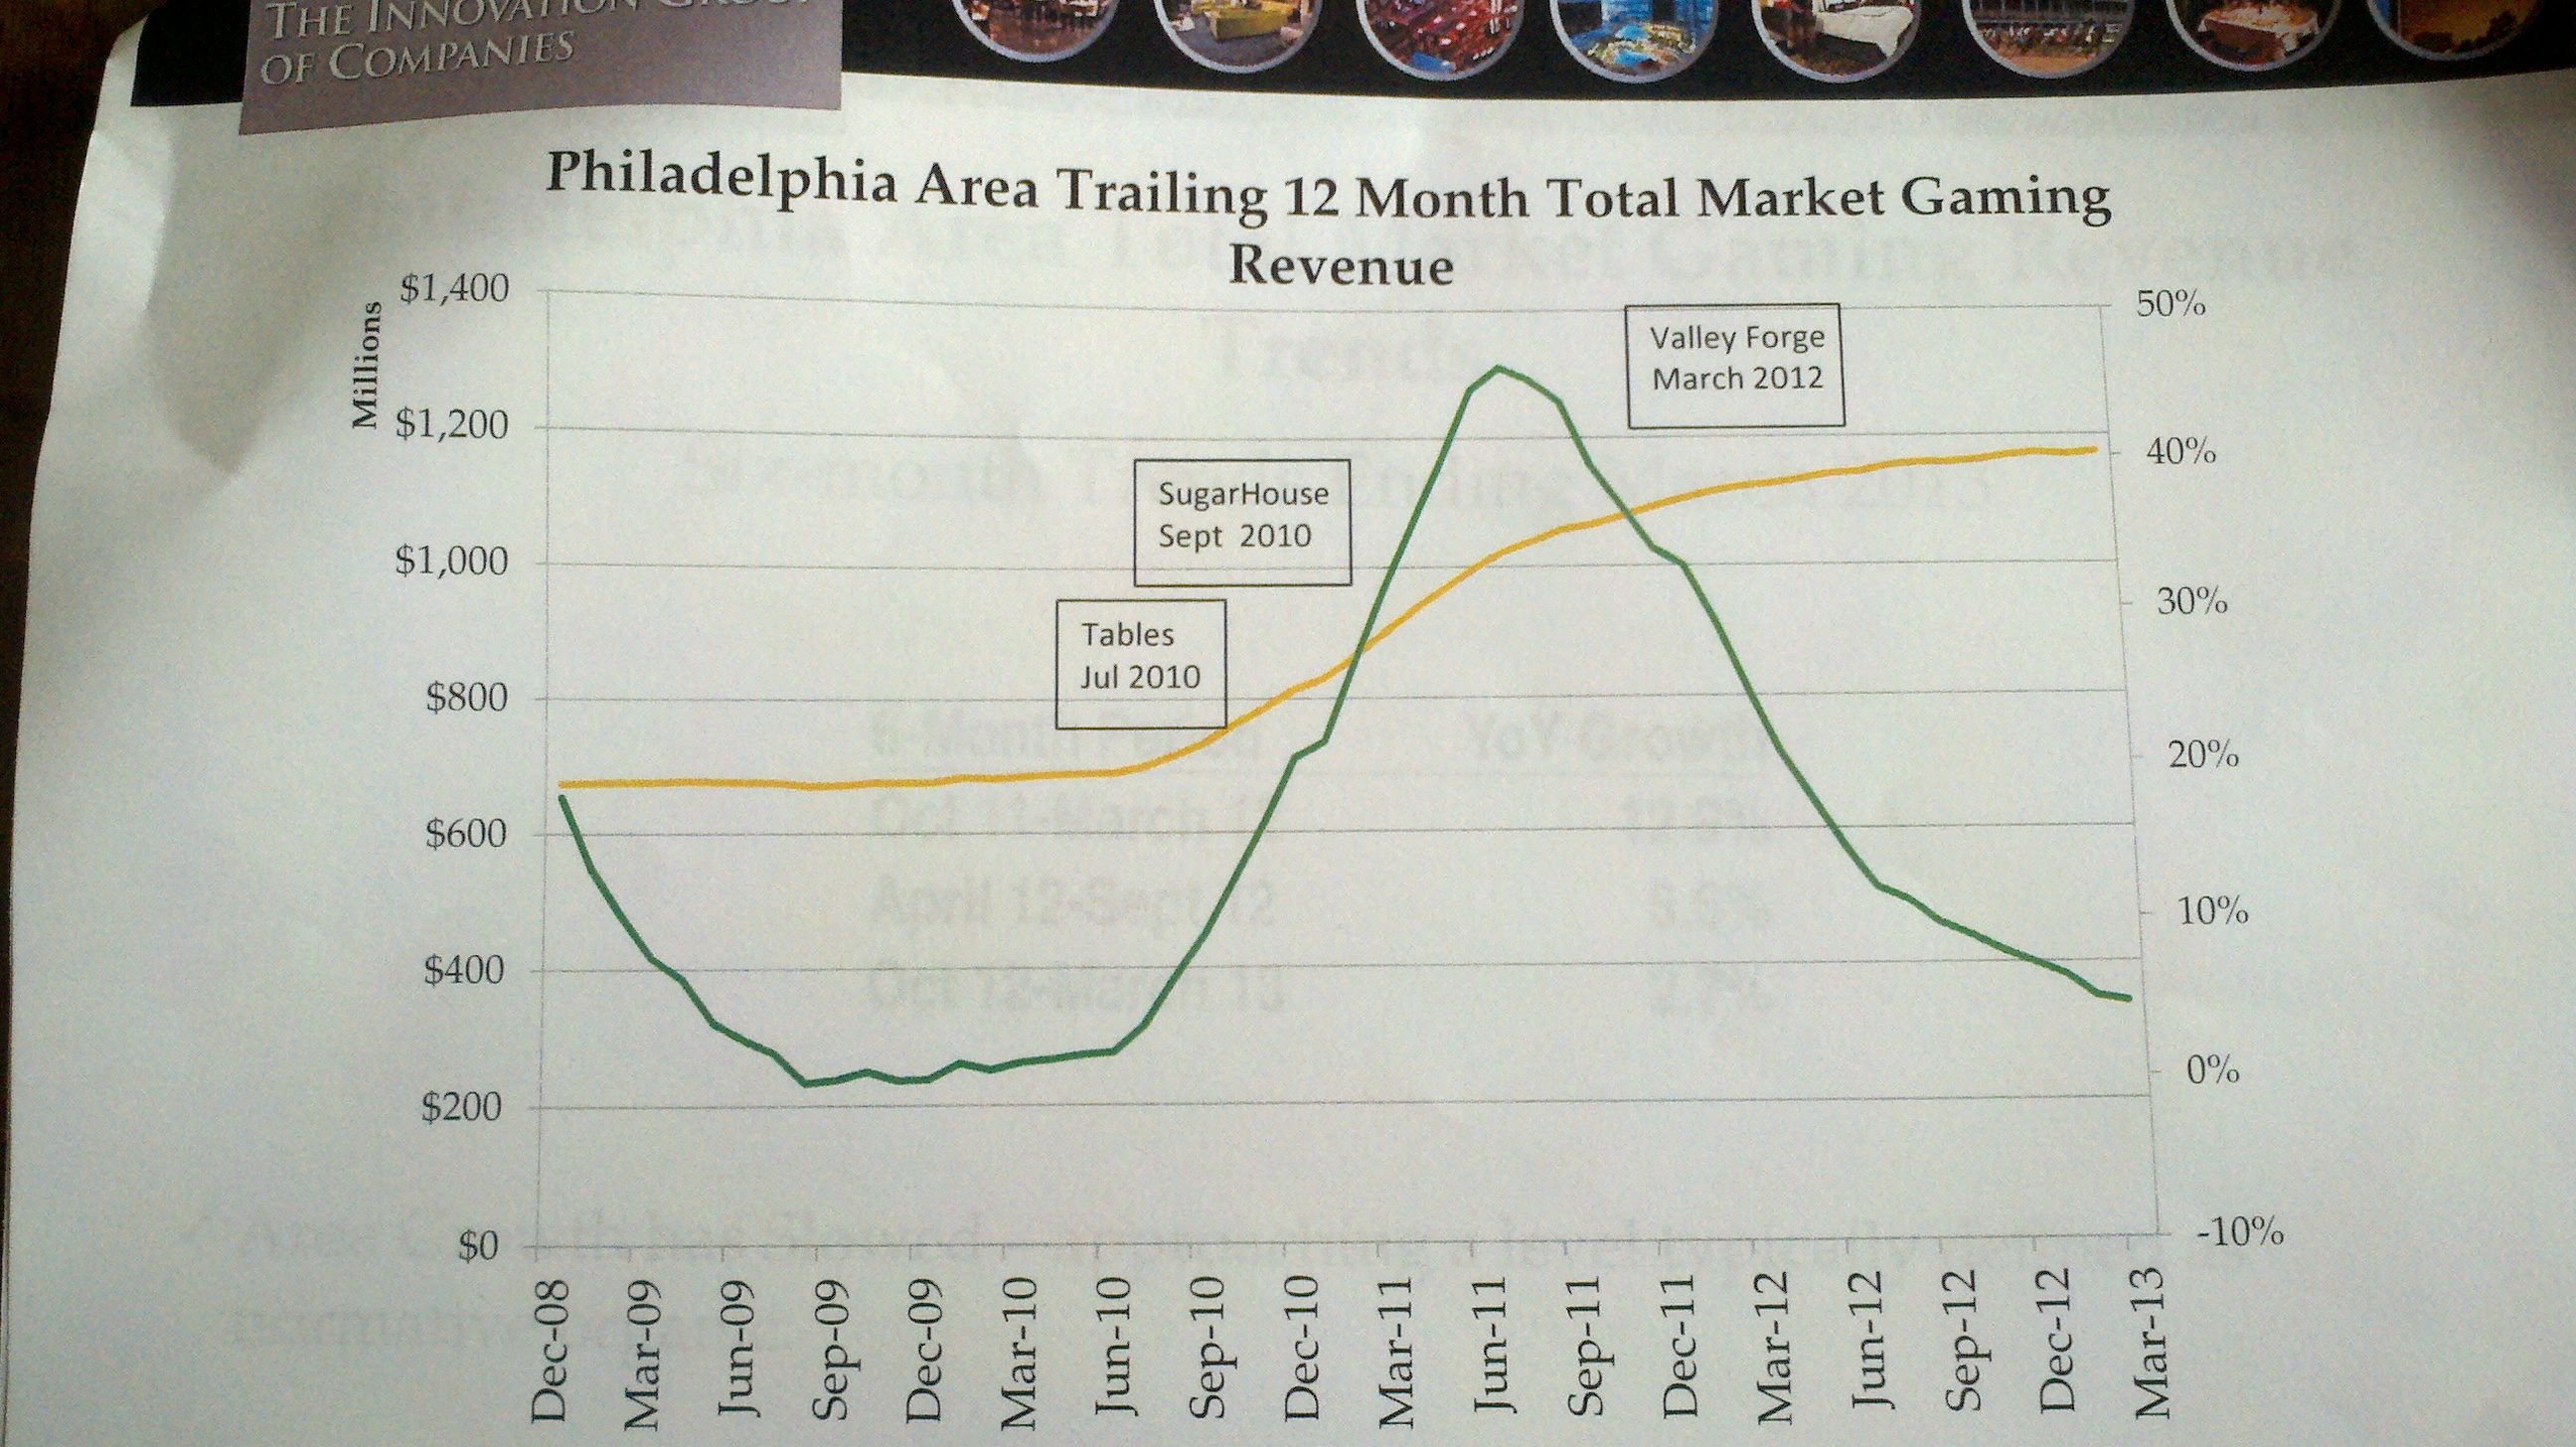 Graph of PA gaming revenue from the Innovation Group